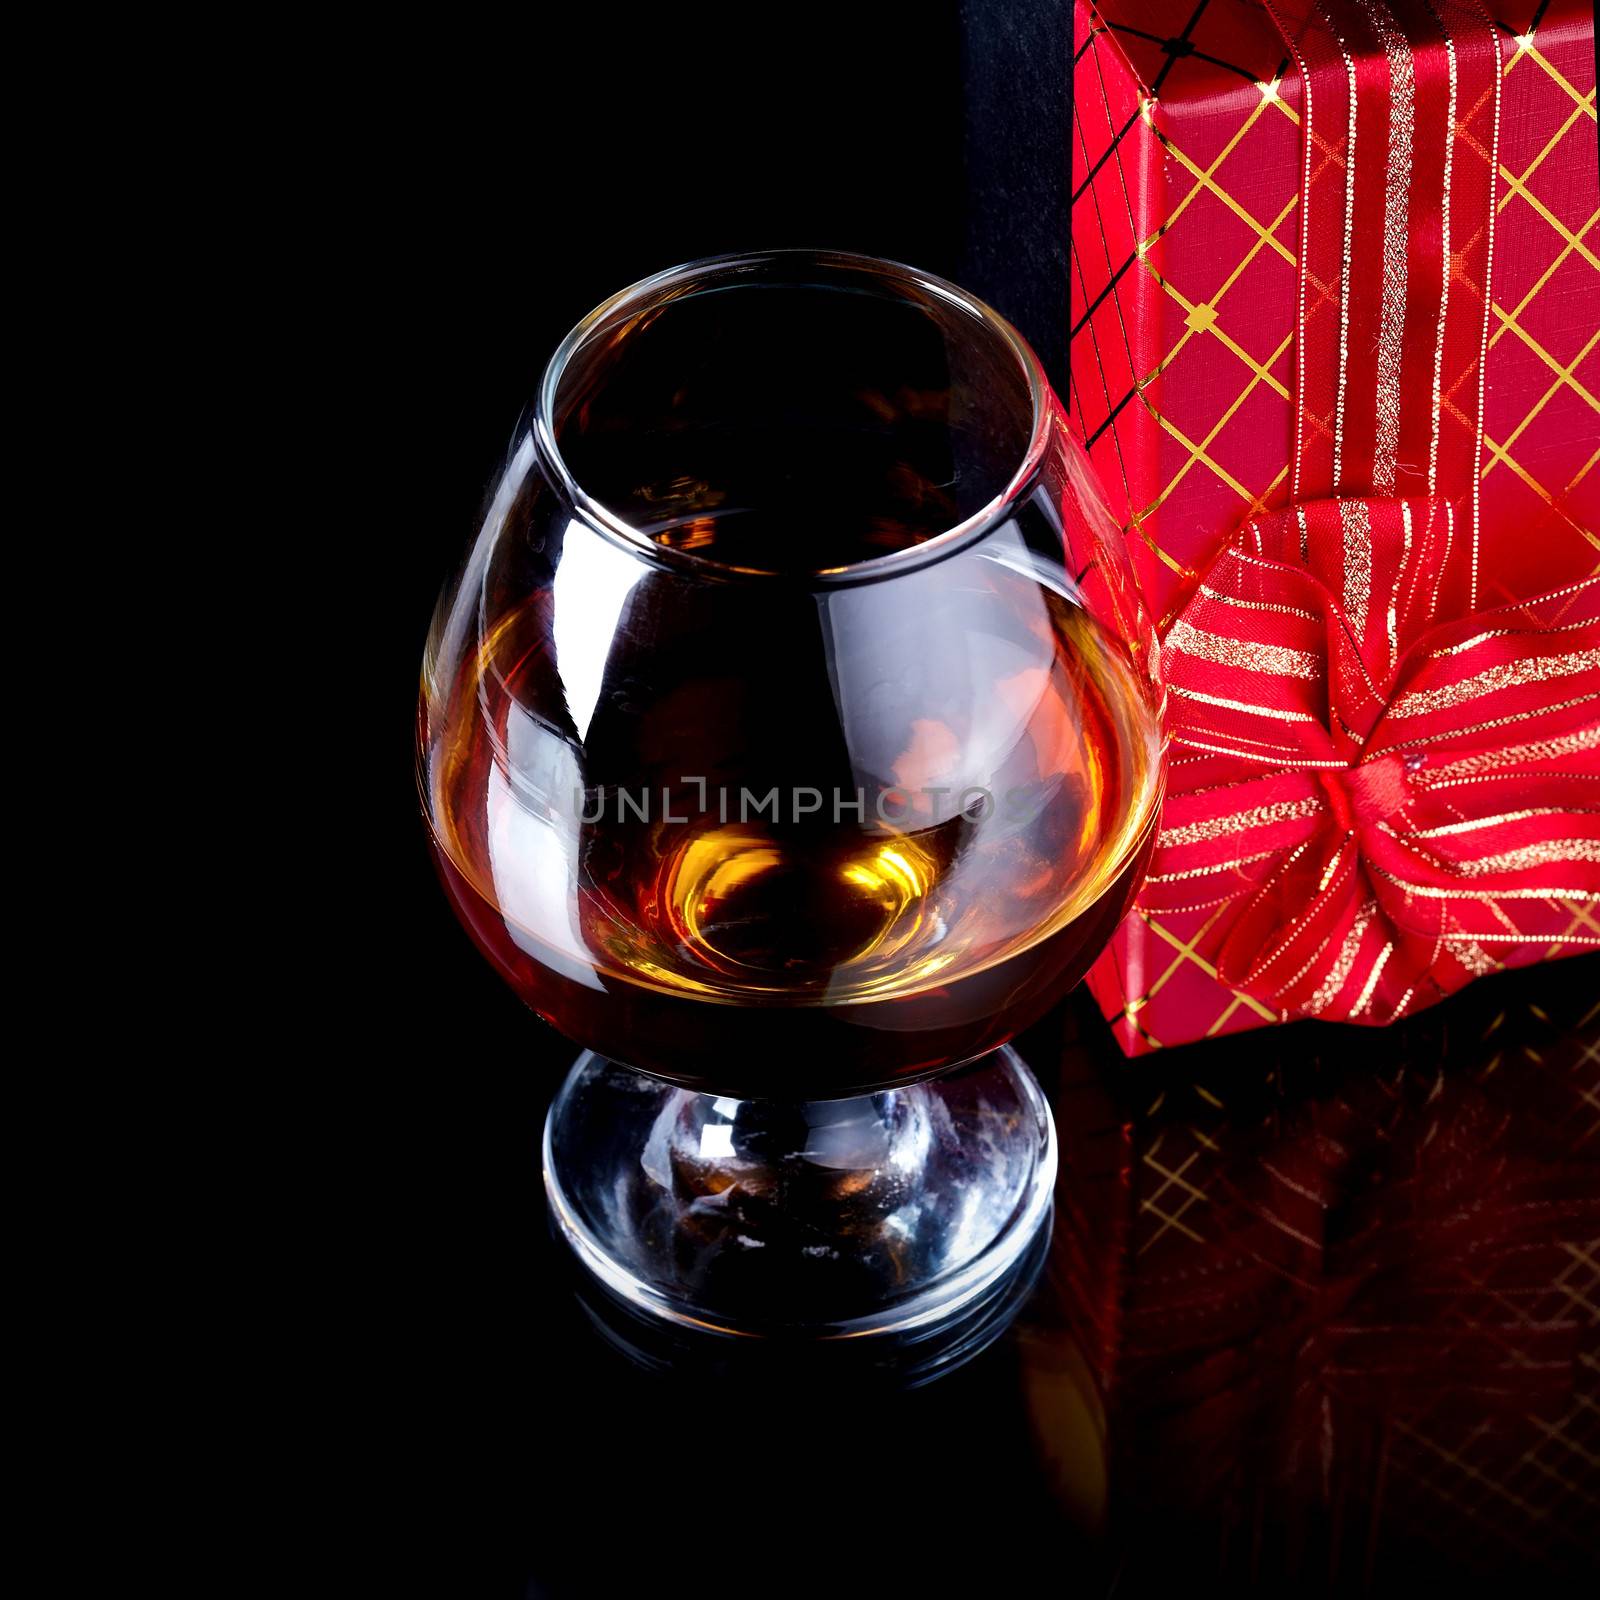 Glass with alcohol and a gift. Alcohol and gift box. Box with a bow and glass with drink.